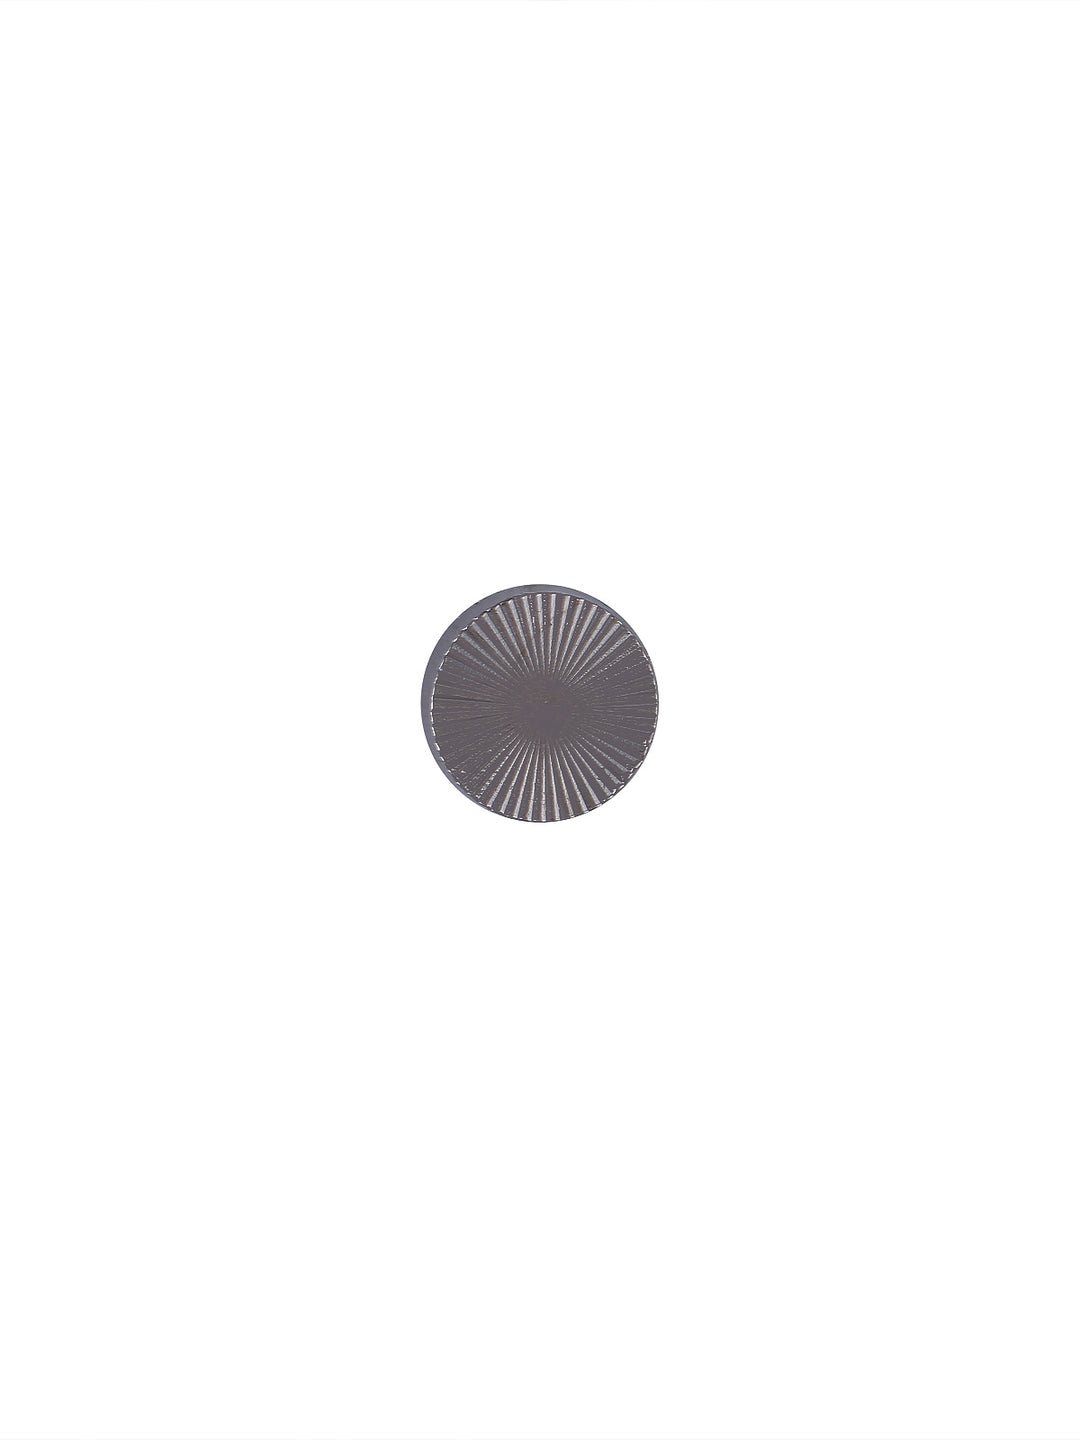 Round Shape with Engraved Lines Shank Metal Button